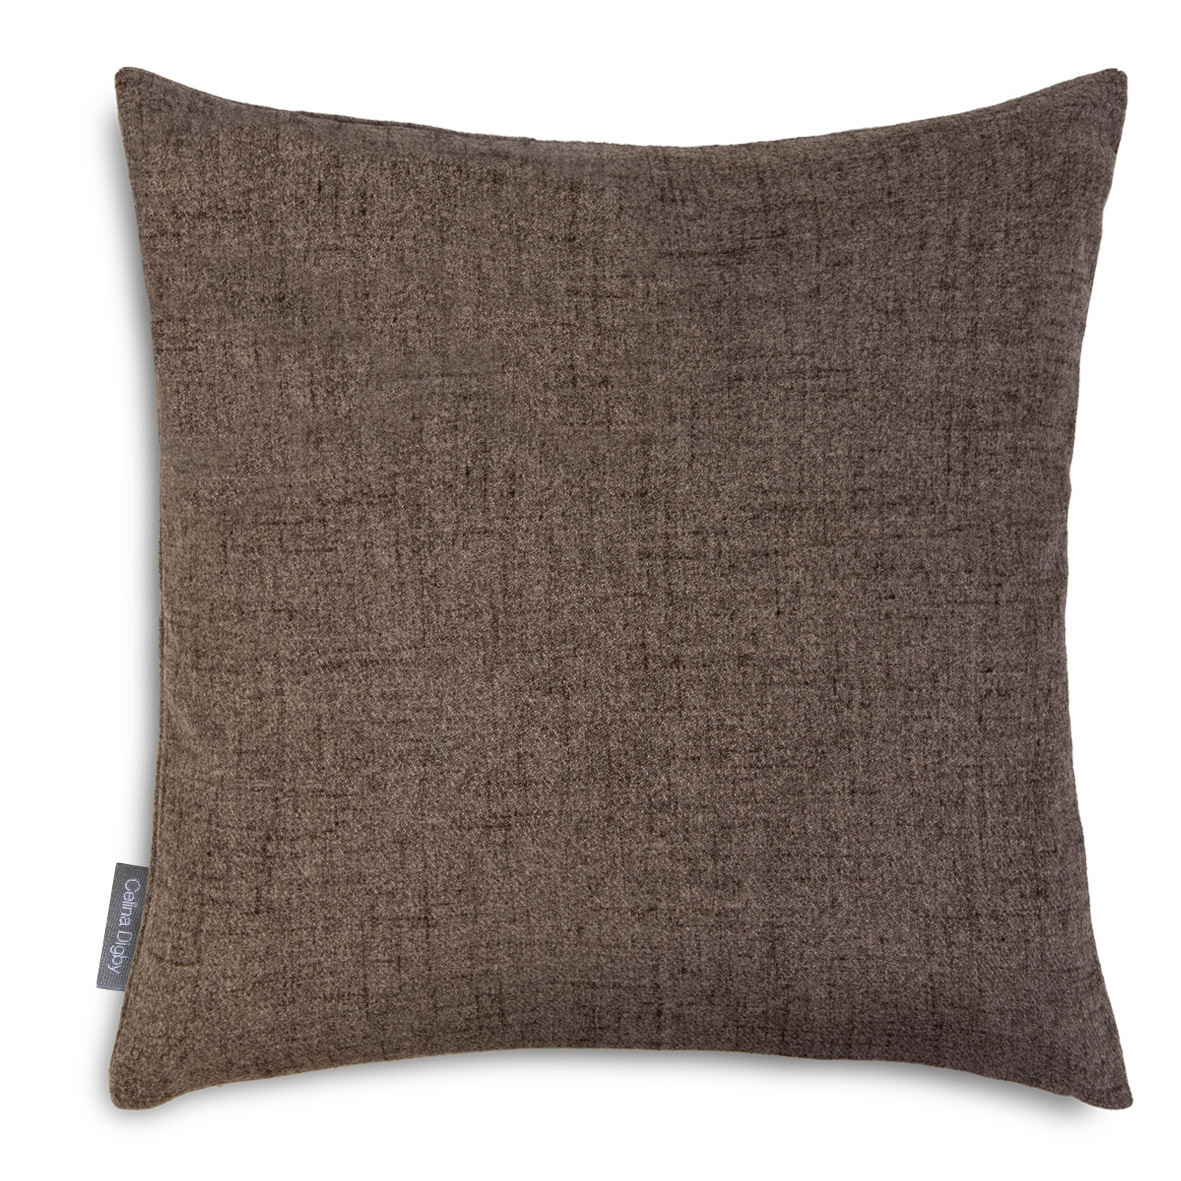 Celina Digby Luxury Wool Effect Cushion – Antique Brown (Available in 2 Sizes) Standard (45x45cm) Feather Filling